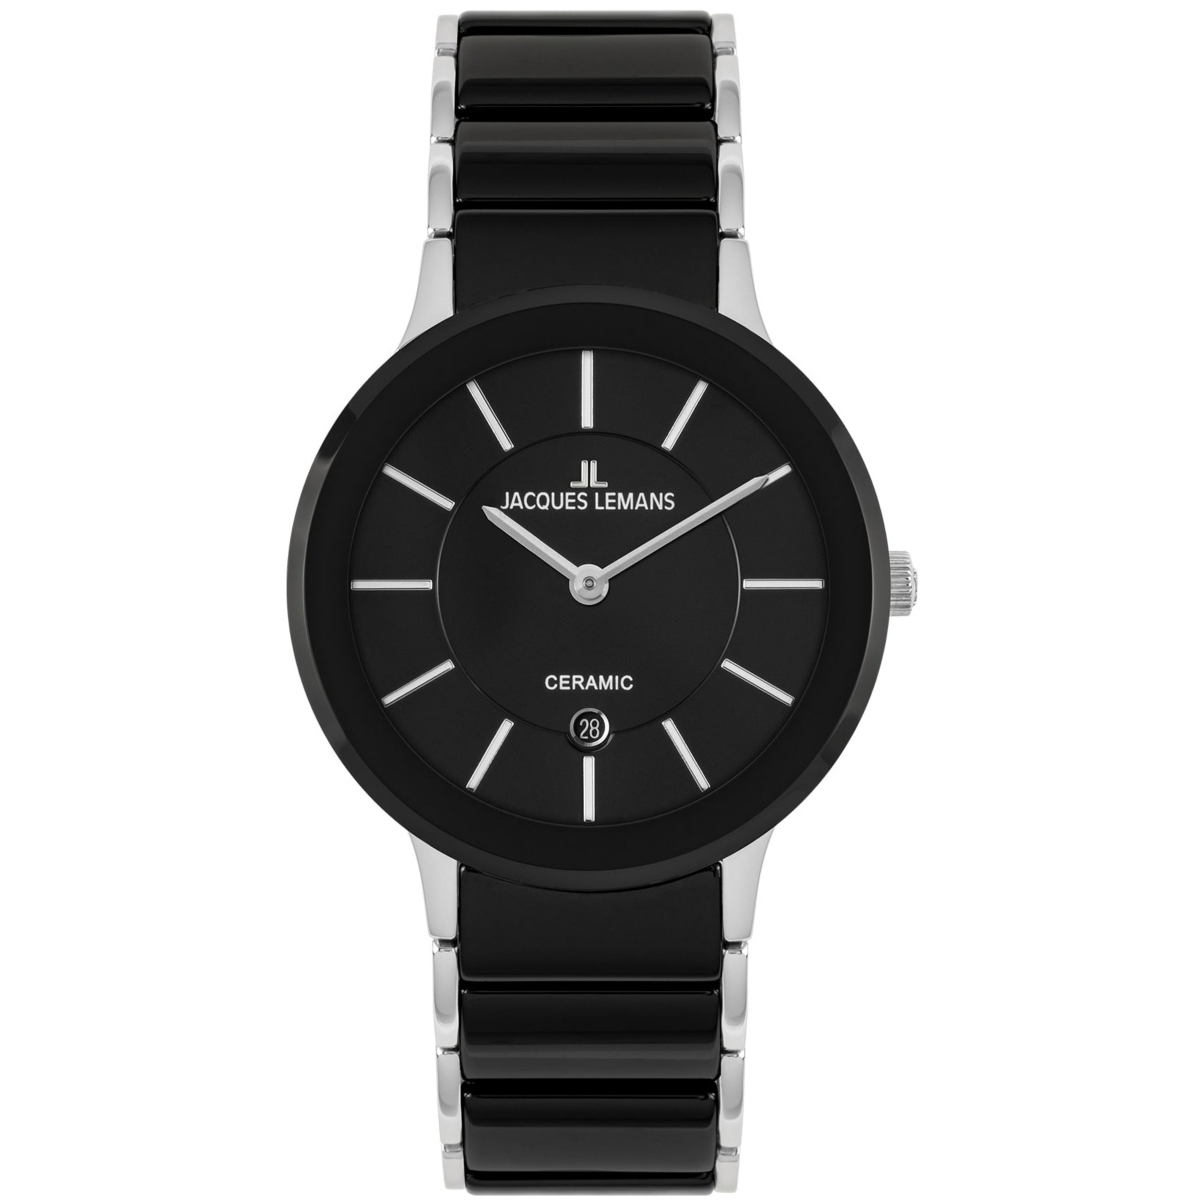 Unisex Dublin Watch with High-Tech Ceramic Strap, Solid Stainless Steel, 1-1855 - Black